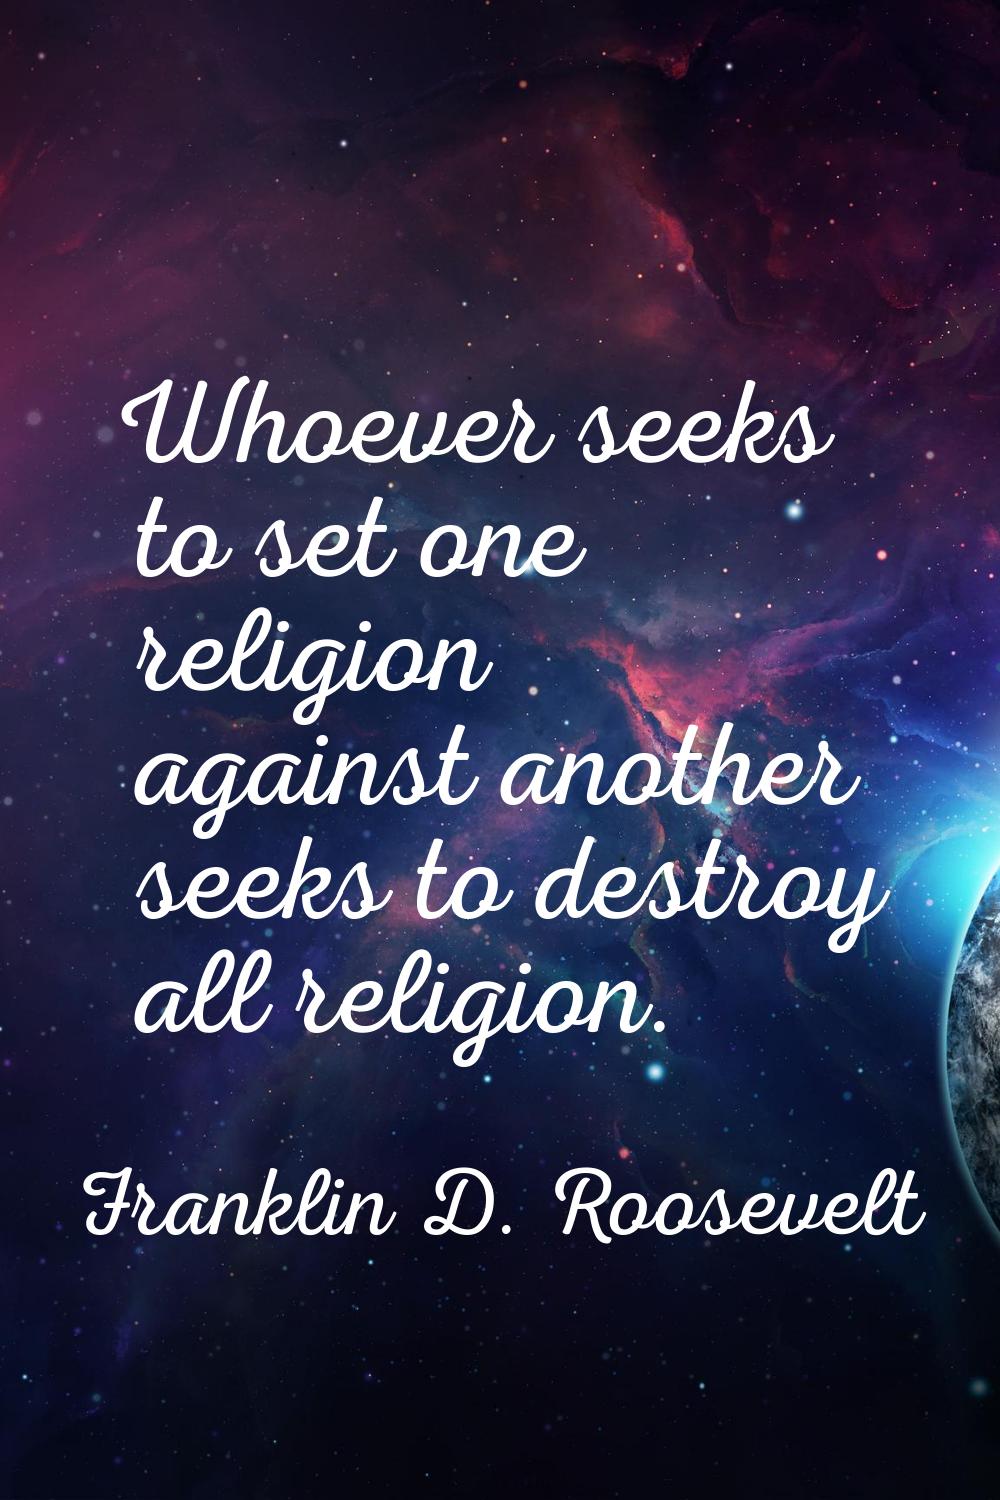 Whoever seeks to set one religion against another seeks to destroy all religion.